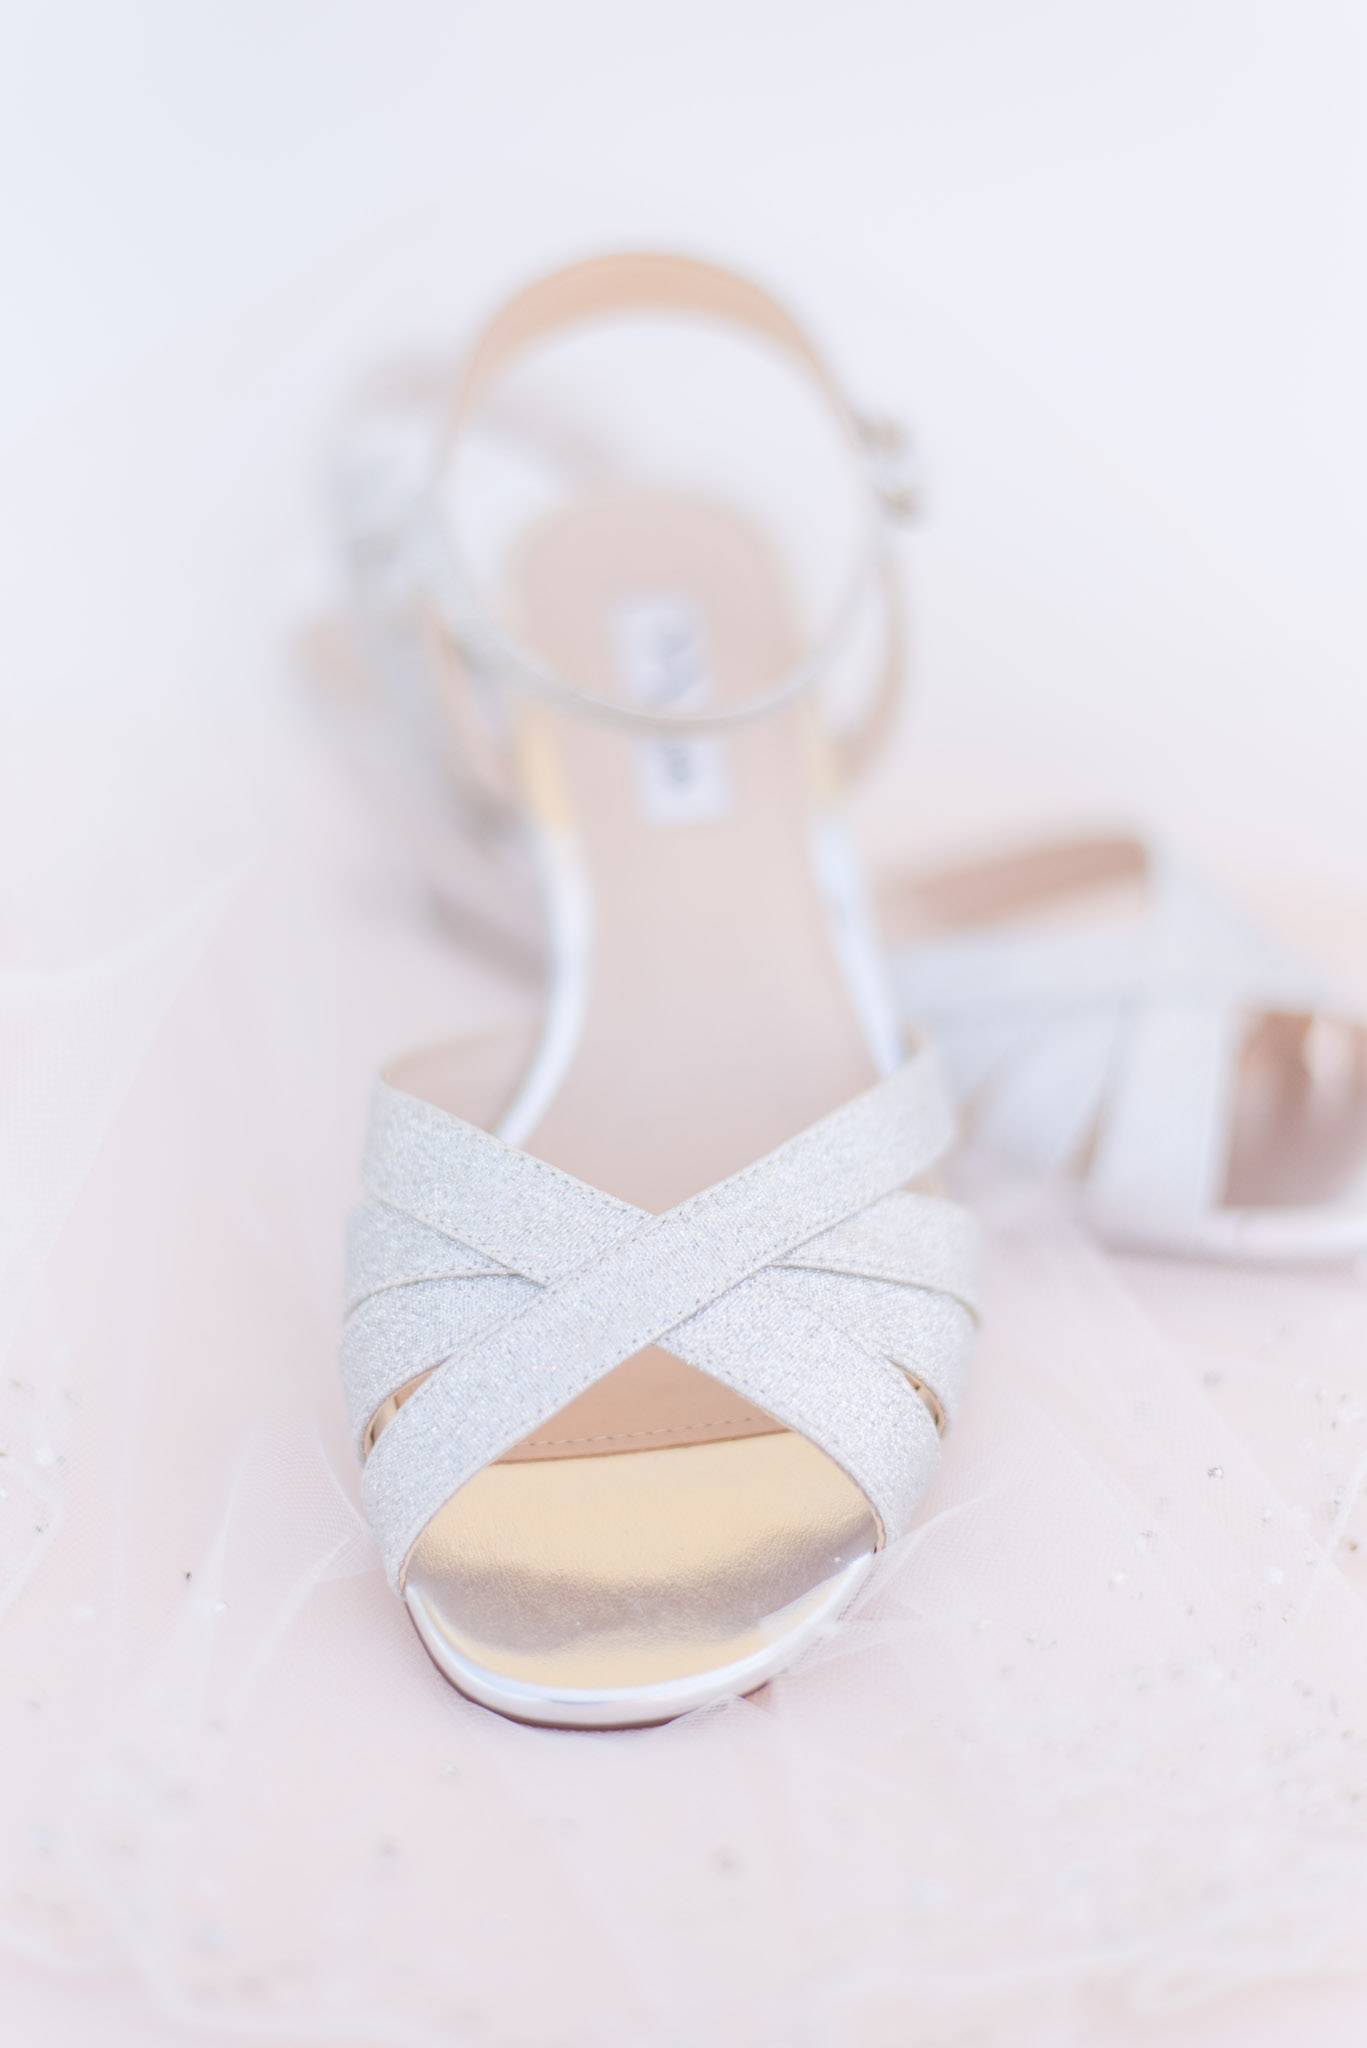 Brownsburg Sparkly Silver Bridal Shoes